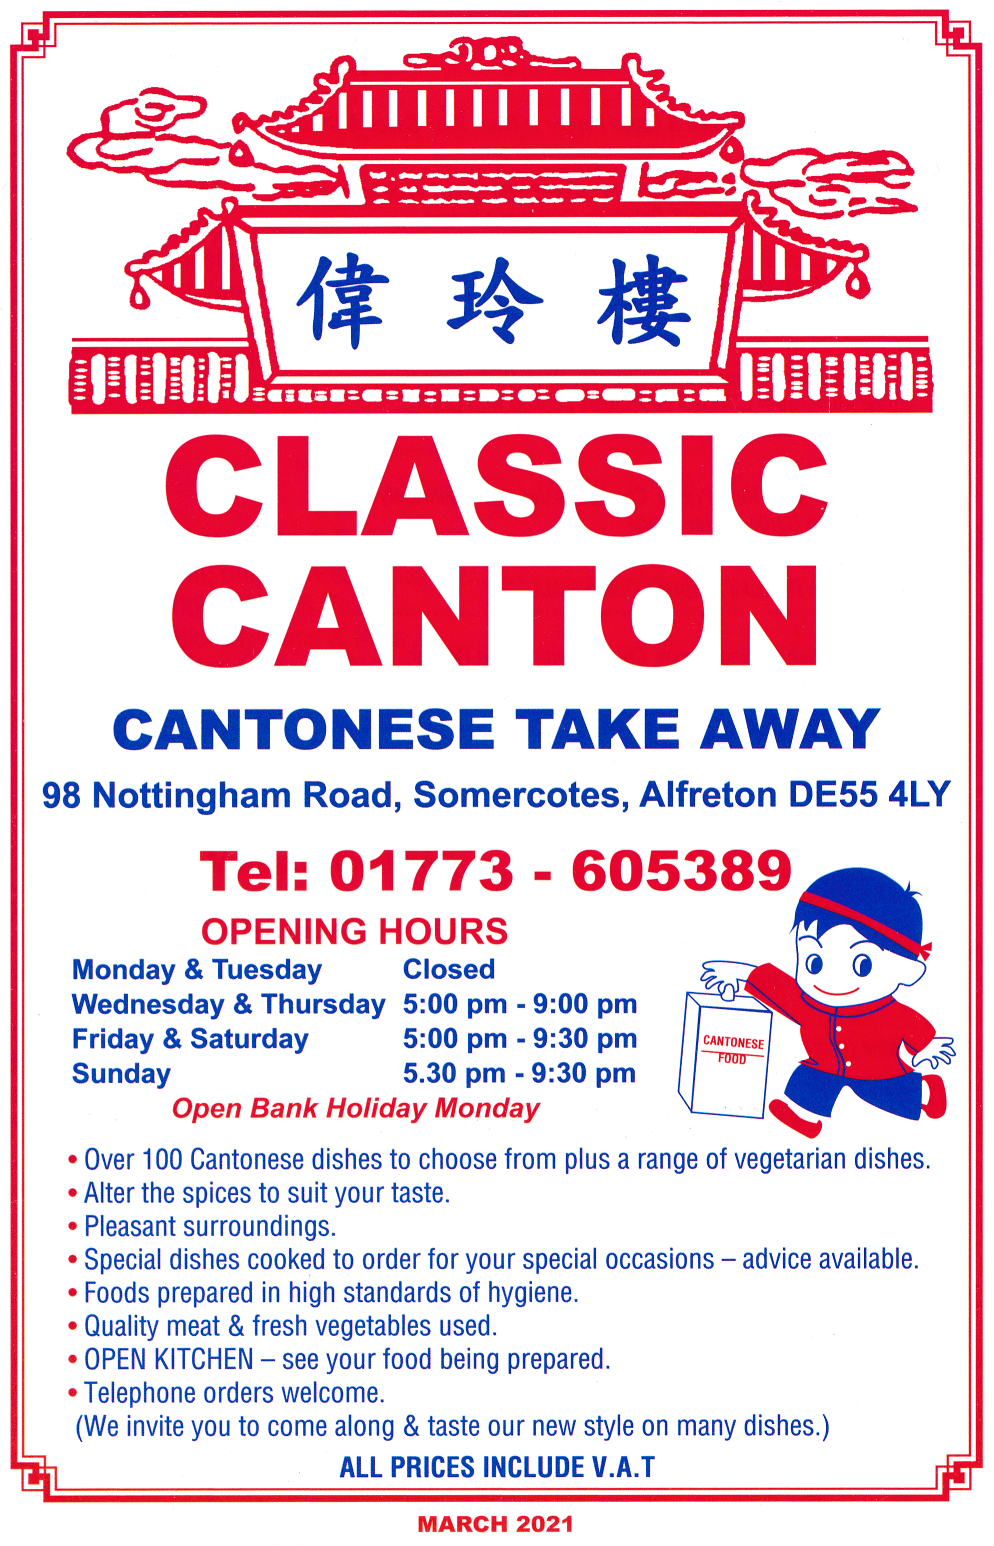 Menu for Classic Canton Chinese and Cantonese cuisine takeaway in Somercotes, Derbyshire DE55 4LY